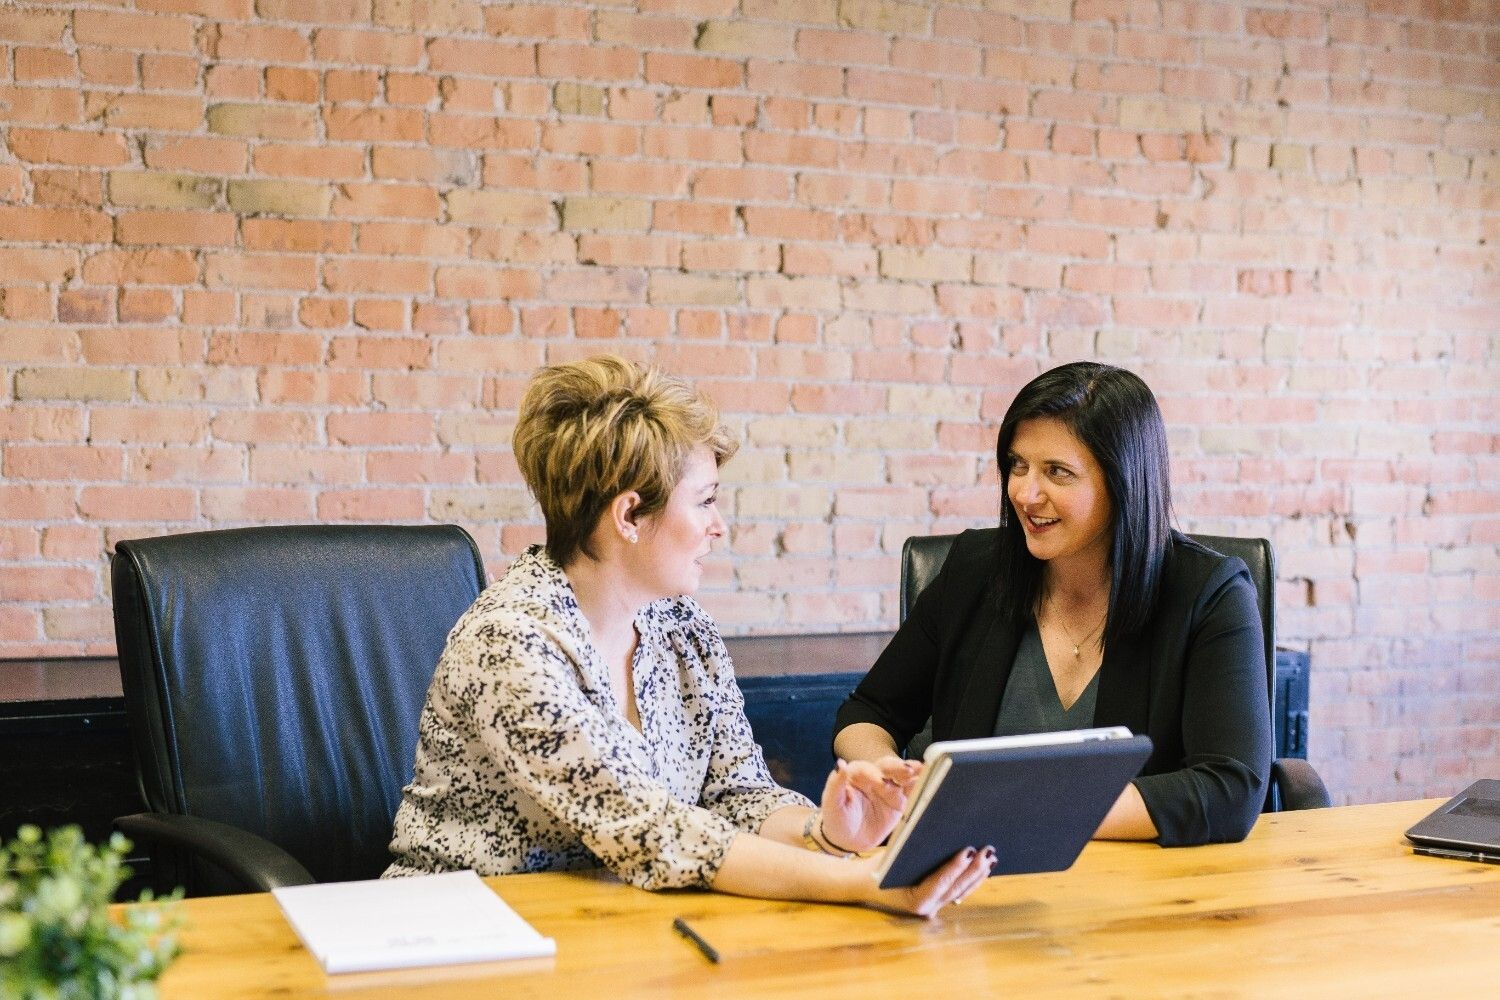 Human resource professionals help boost employee engagement. This image shows two women sat together, working and smiling.